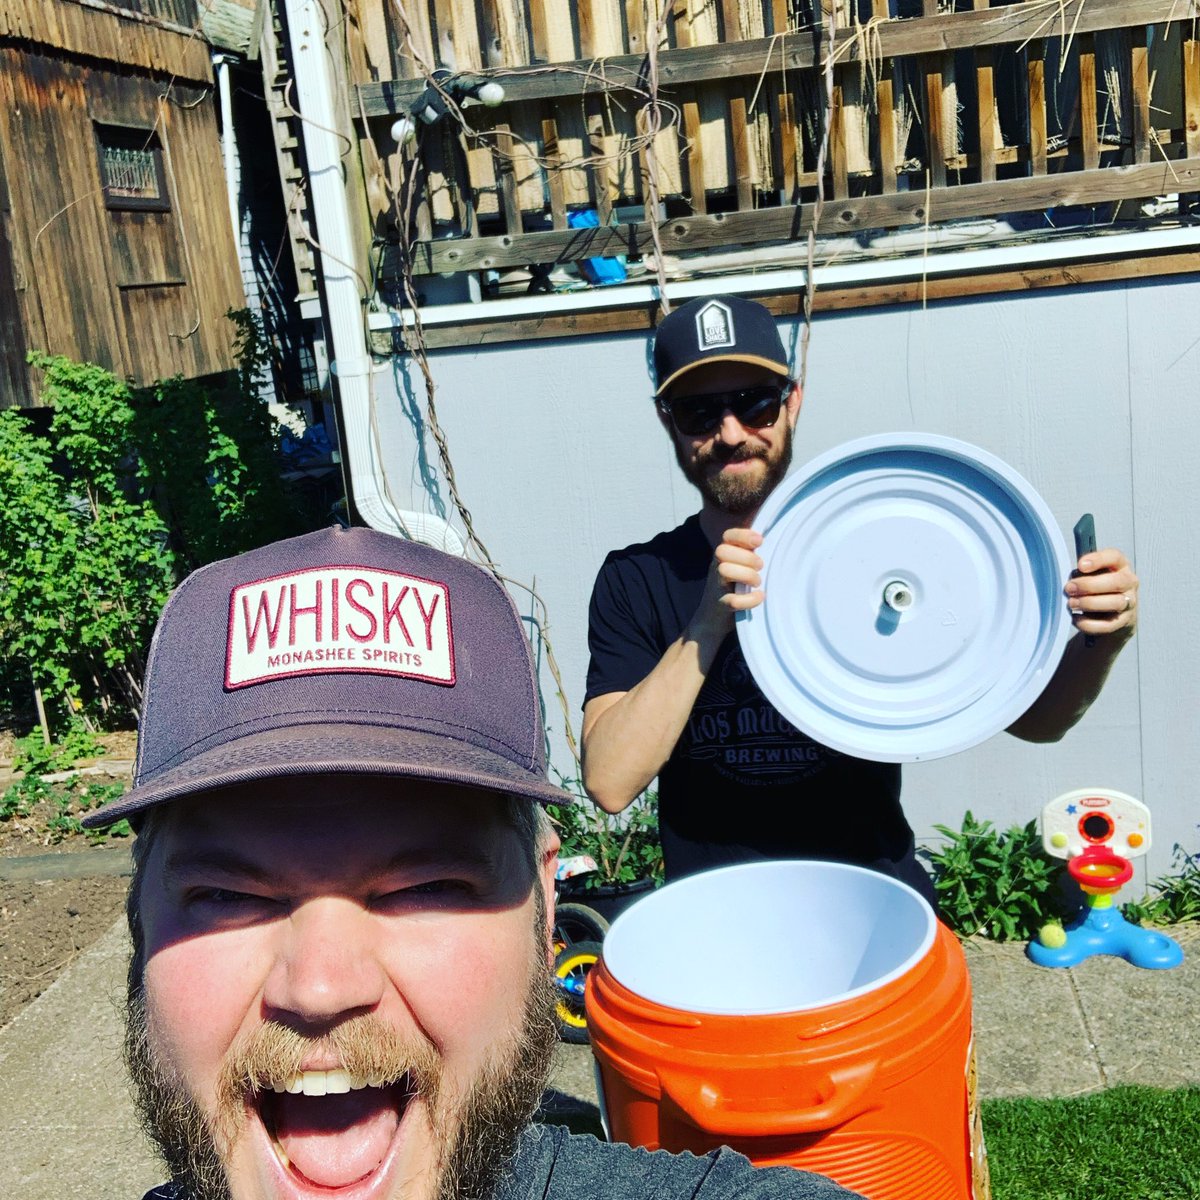 Distant #YardBrew going down today! Enjoy the sunshine safely everyone!! ☀️🍺 #BCBeer #Doans #SharpeBrewing #eastvan #smiles #sunshine #goodtimes #yvrbeer #homebrew #funtimes